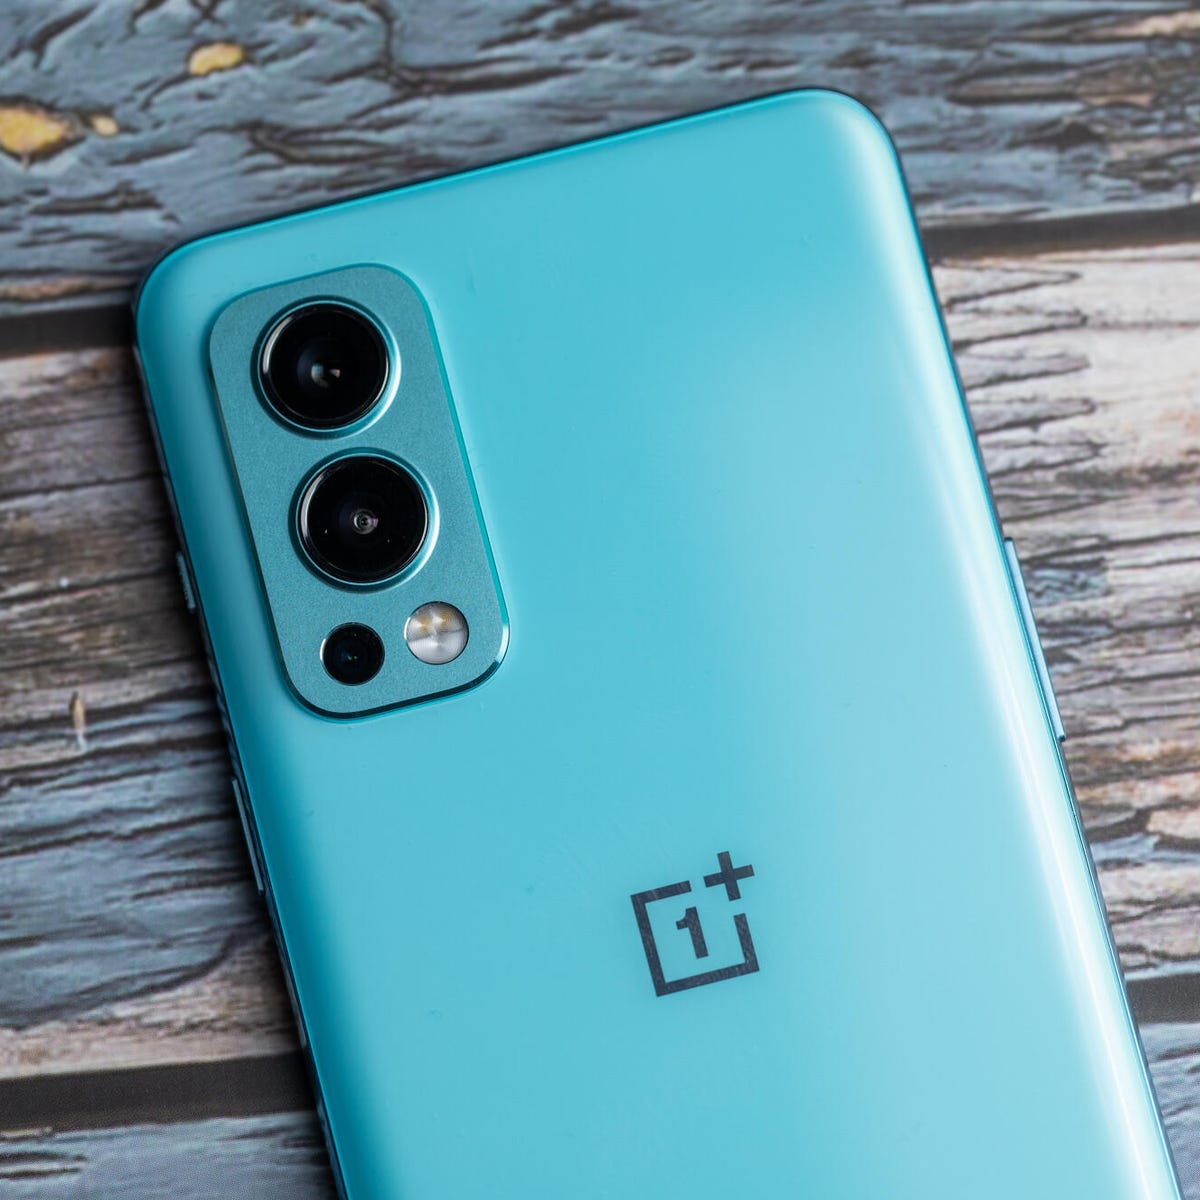 OnePlus Nord 2 takes gorgeous pictures. Here's what they look like